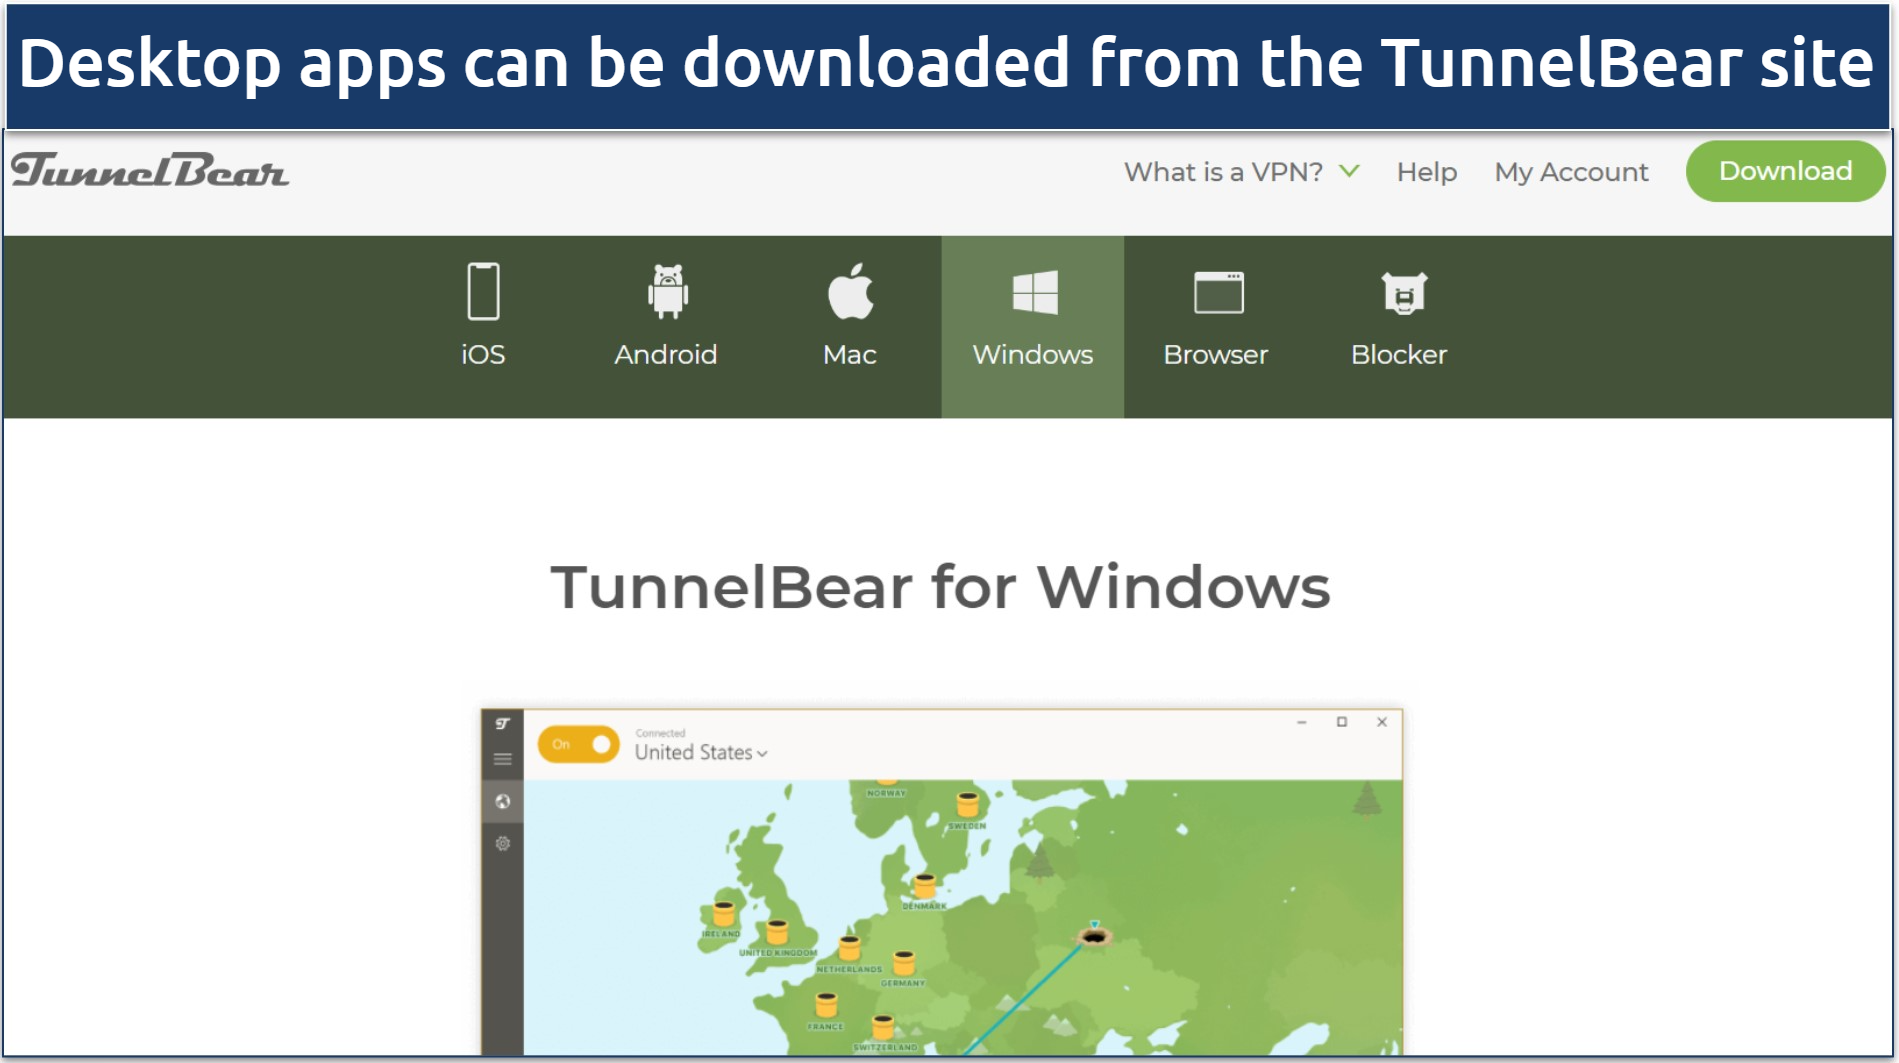 A screenshot showing TunnelBear's download page along with the compatible devices